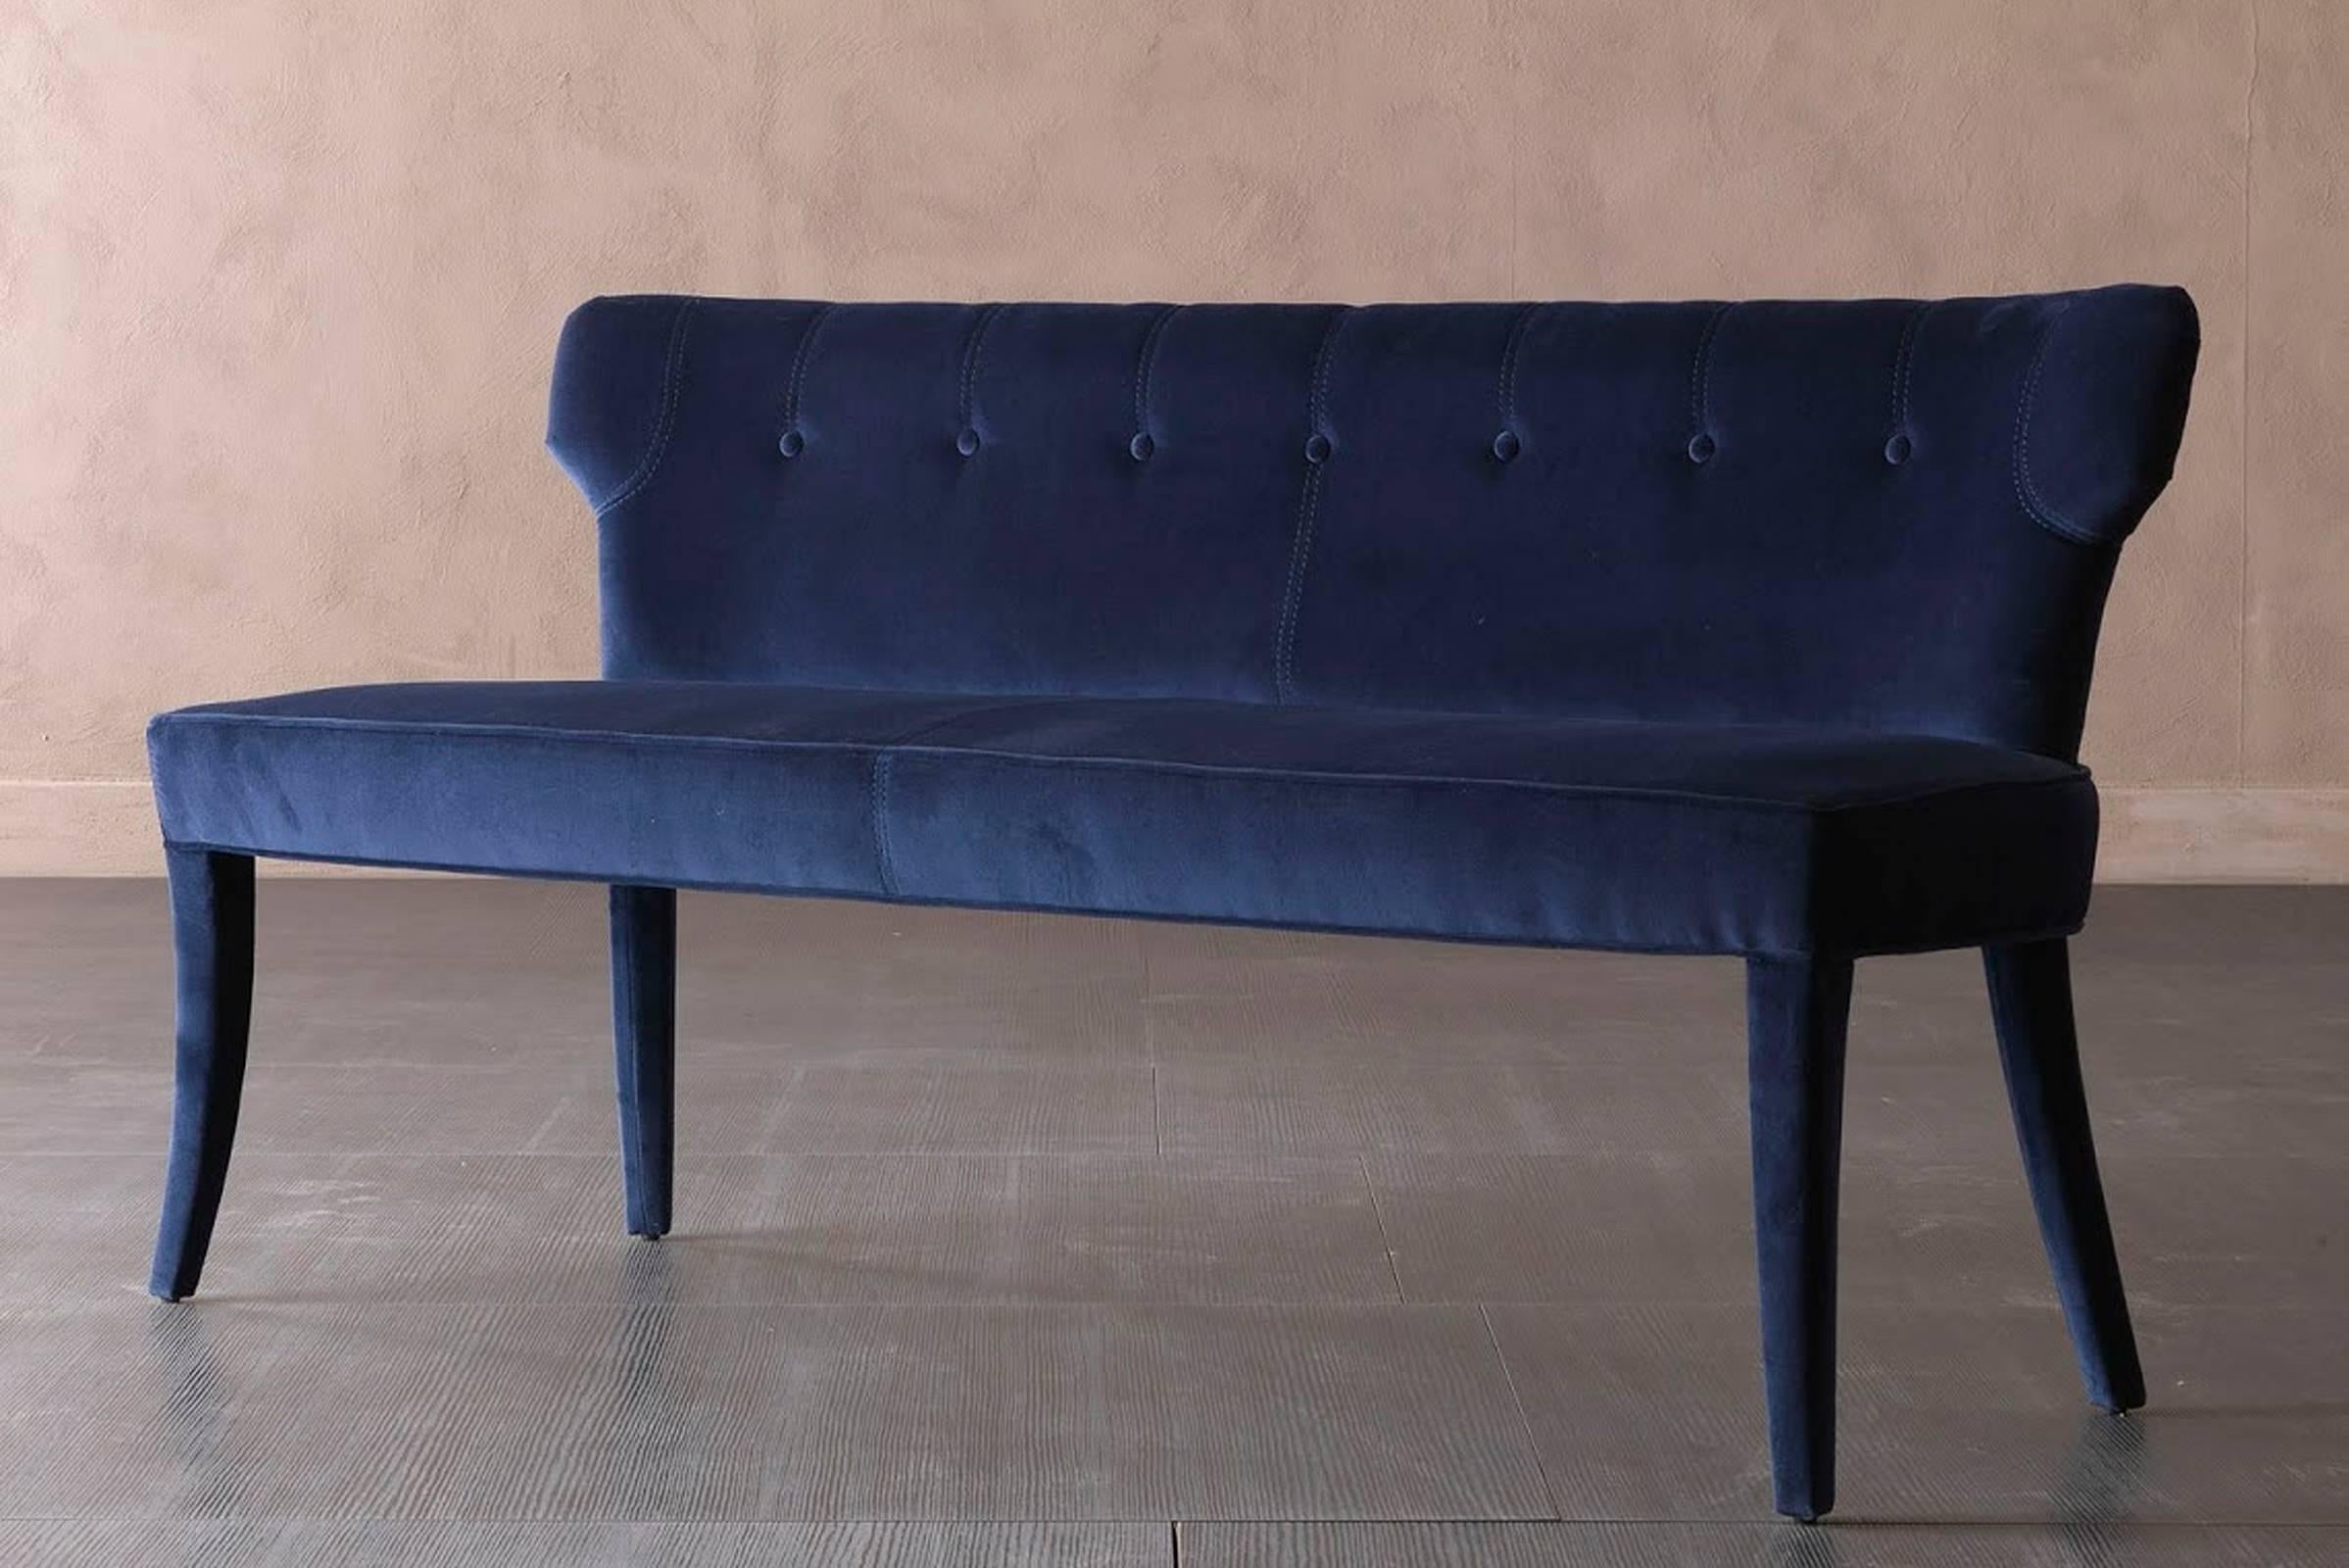 Bench Coralia with legs in wood covered with leather category B.
Seat and back upholstered with leather category B.
Dimensions: L130 x P58 x H77cm. Ref: 150-5032/130GL.
Available in:
Leather category C & D.
Fabric category A & B.
Legs